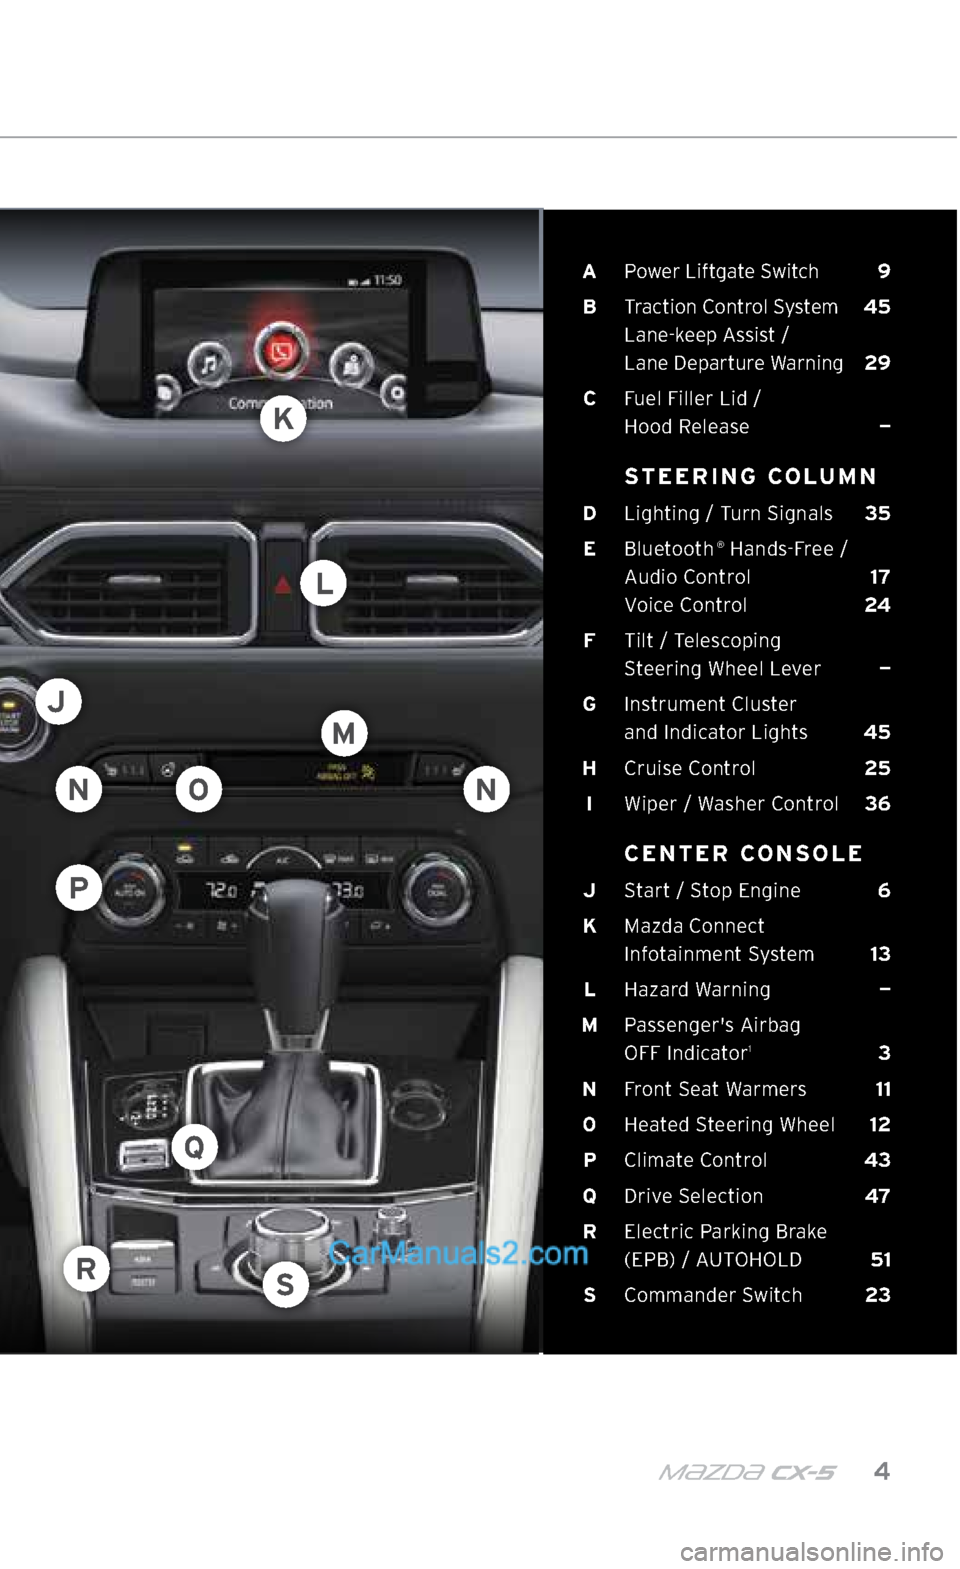 MAZDA MODEL CX-5 2017  Smart Start Guide (in English) m{zd{ cx-5    4
 A  Power Liftgate Switch   9
  B   Traction Control System  45 
Lane-keep Assist /   
Lane Departure Warning  29
  C   Fuel Filler Lid /   
Hood Release  —
   STEERING COLUMN
 D  Li